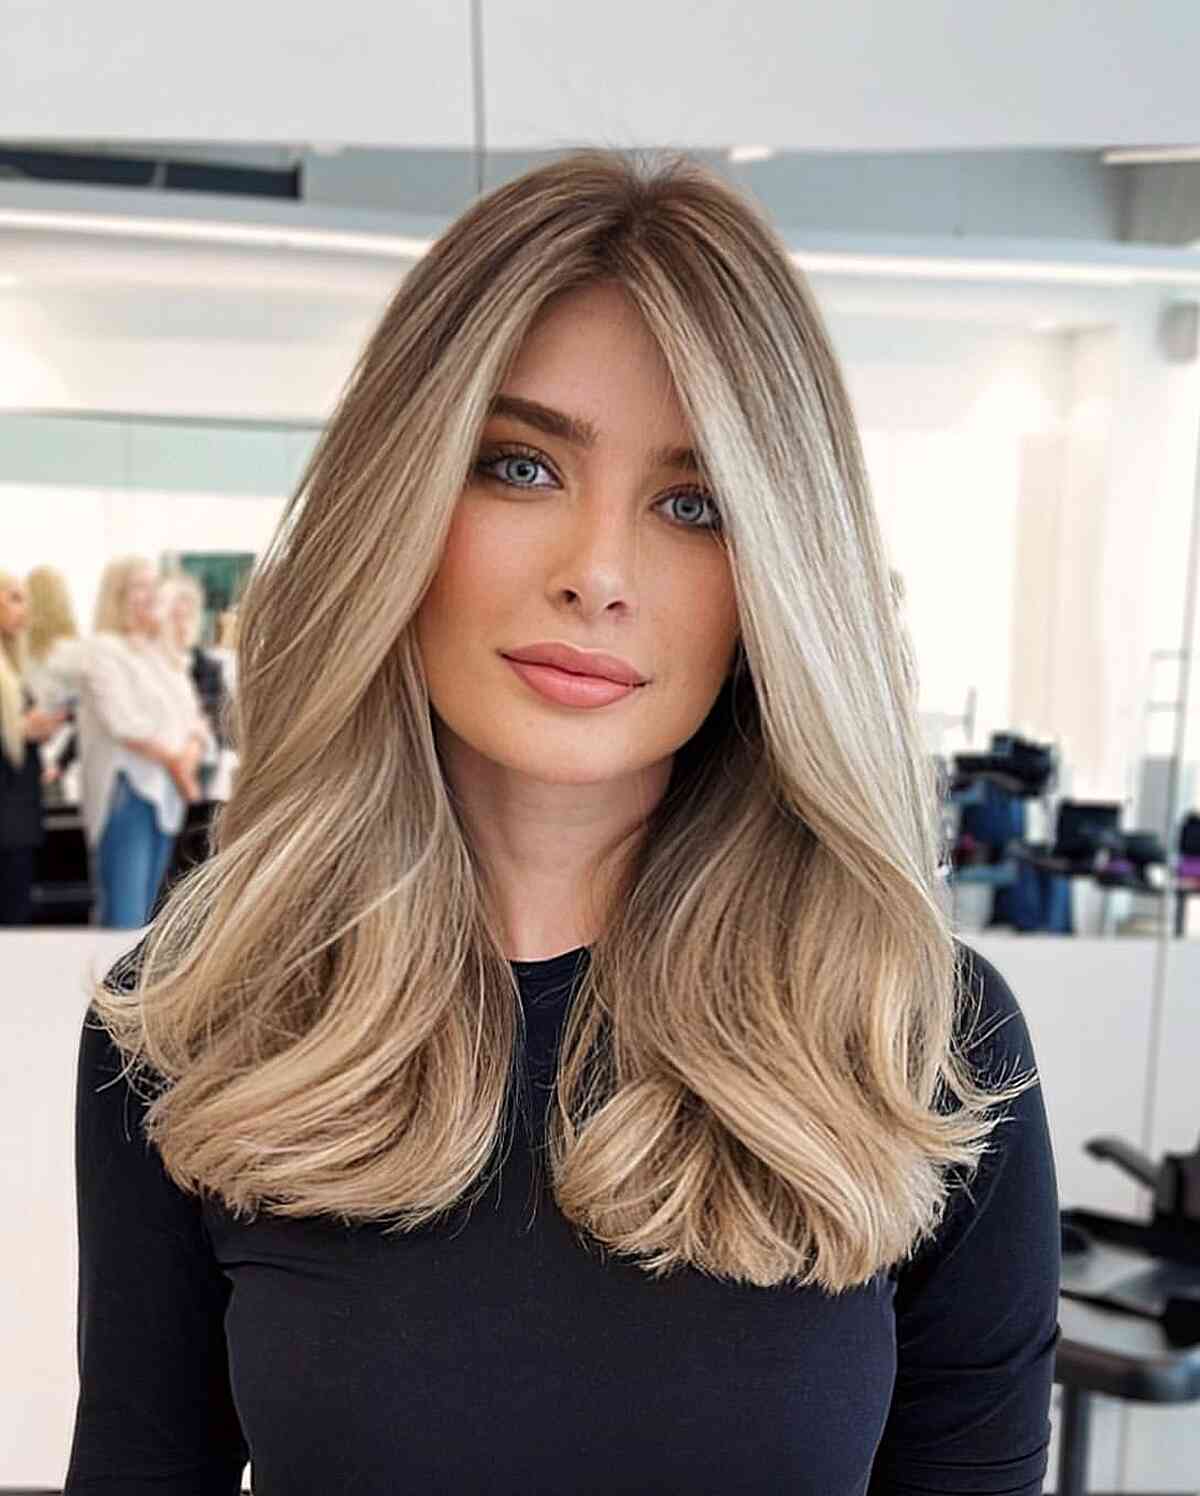 Medium Subtle Middle-Part Thick Haircut for women with blunt ends and no bangs